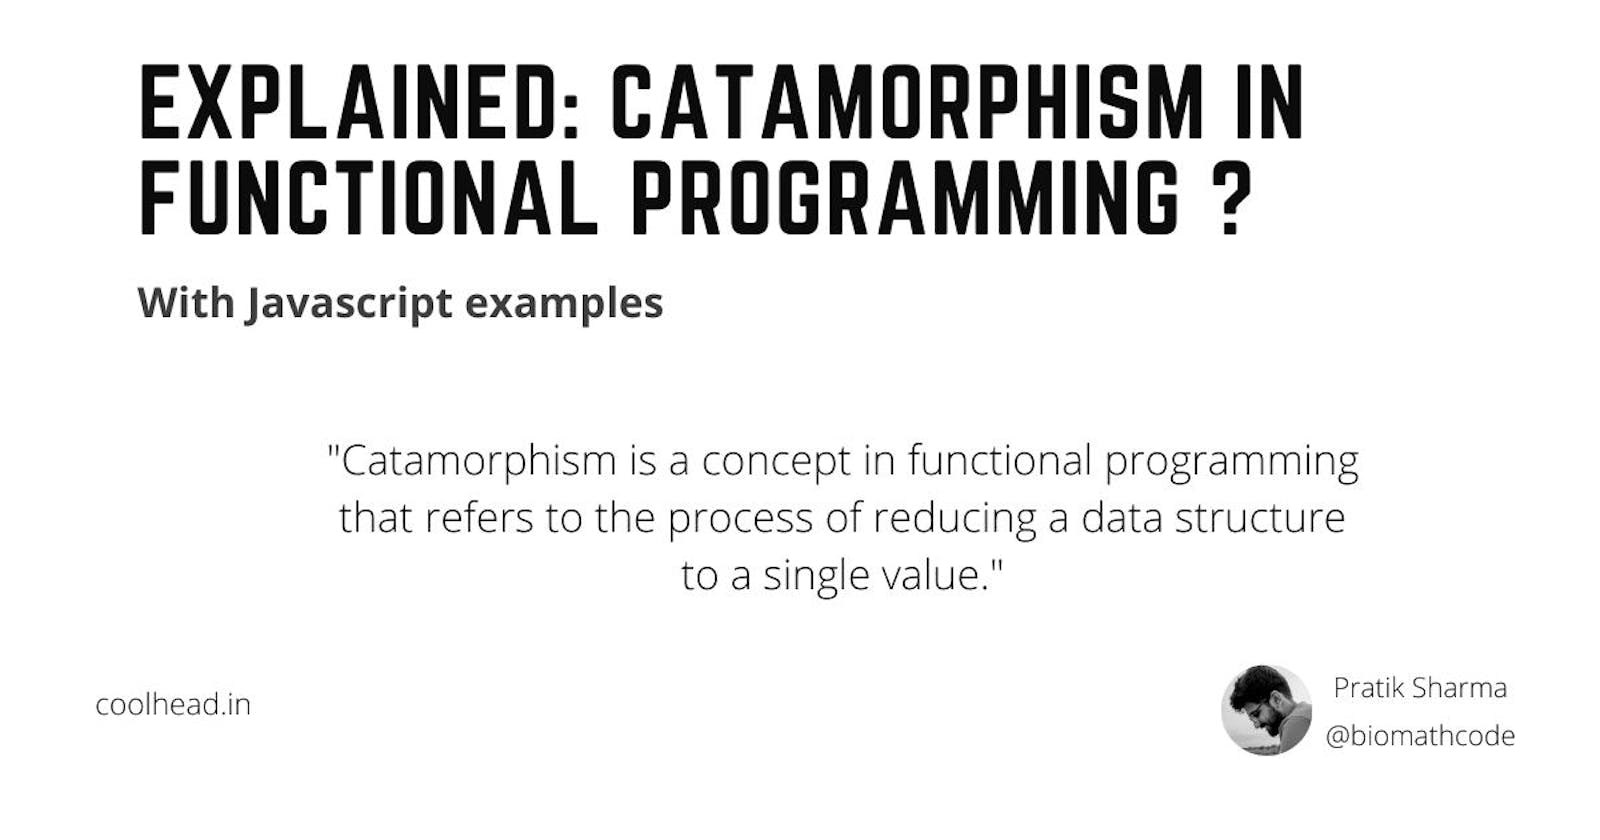 Explained: Catamorphism in Functional Programming with examples in javascript